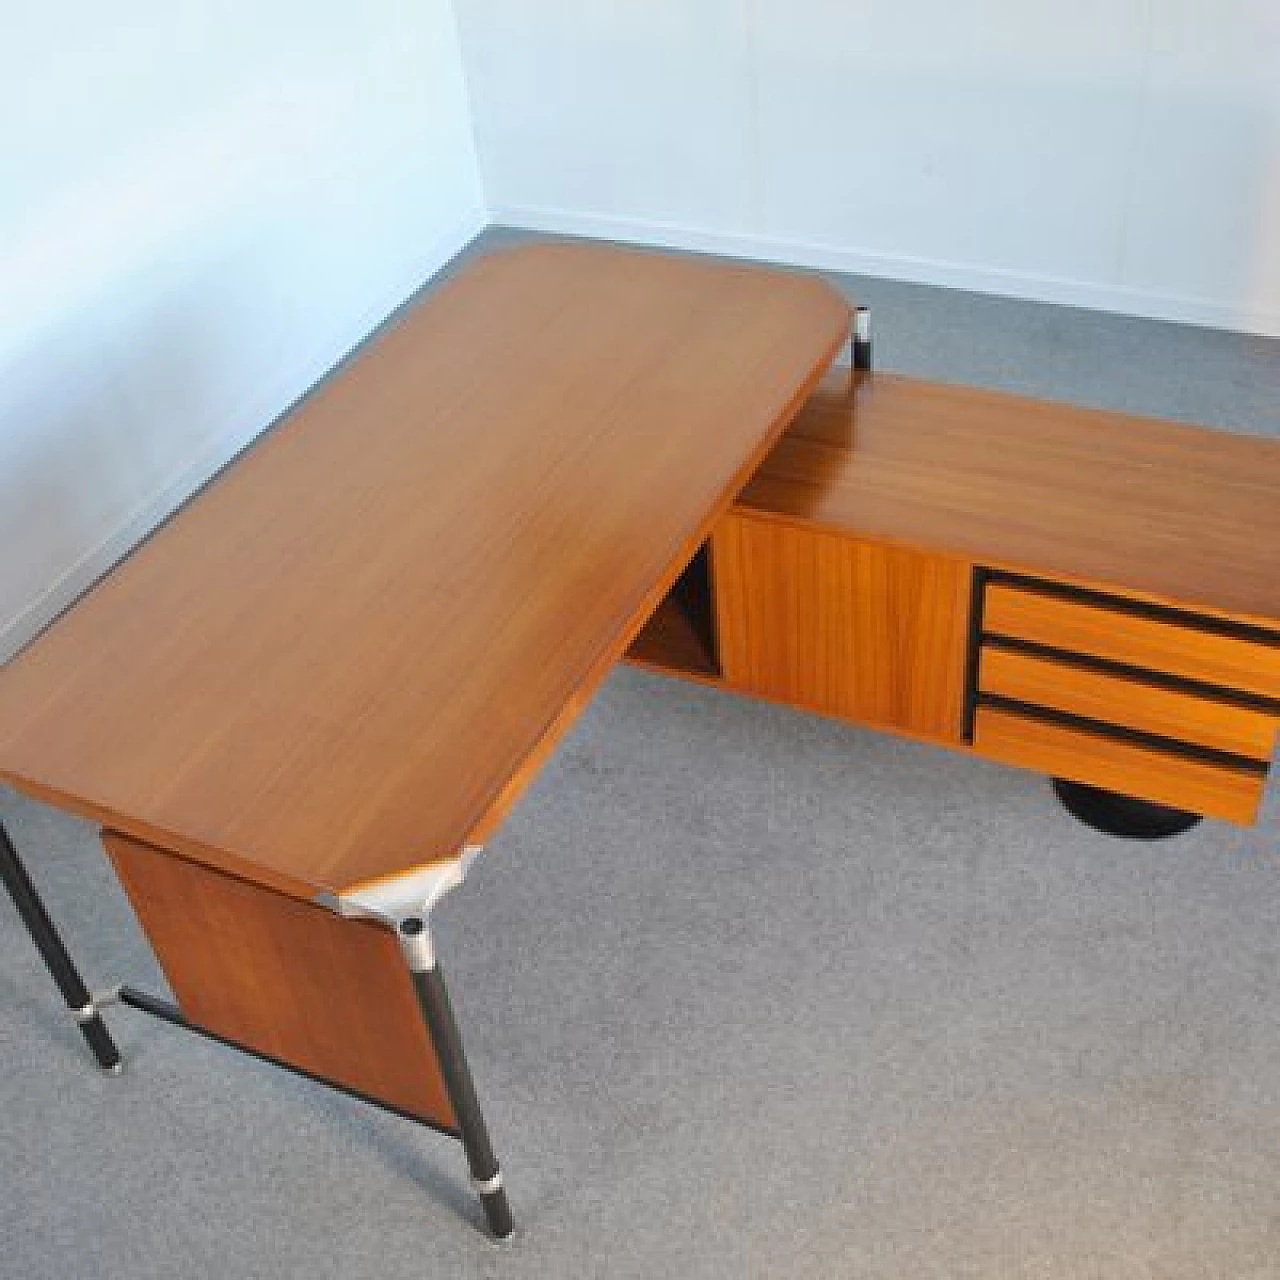 Executive desk by Ico Parisi for MIM Rome, 1950s 1412243